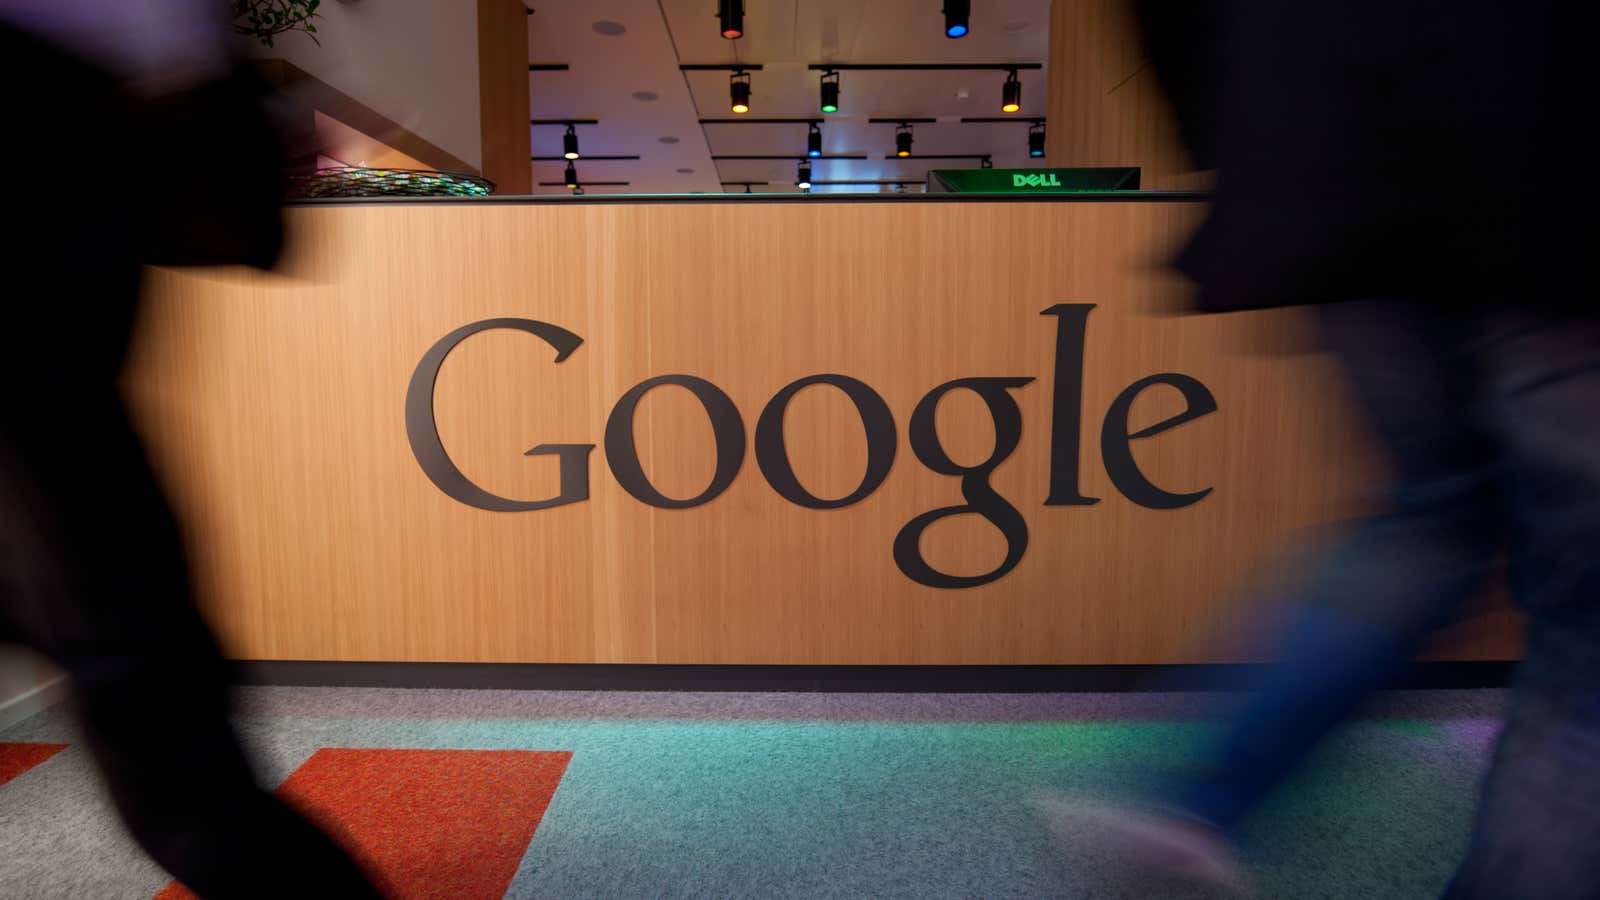 Google likely won’t have to pay German publishers.